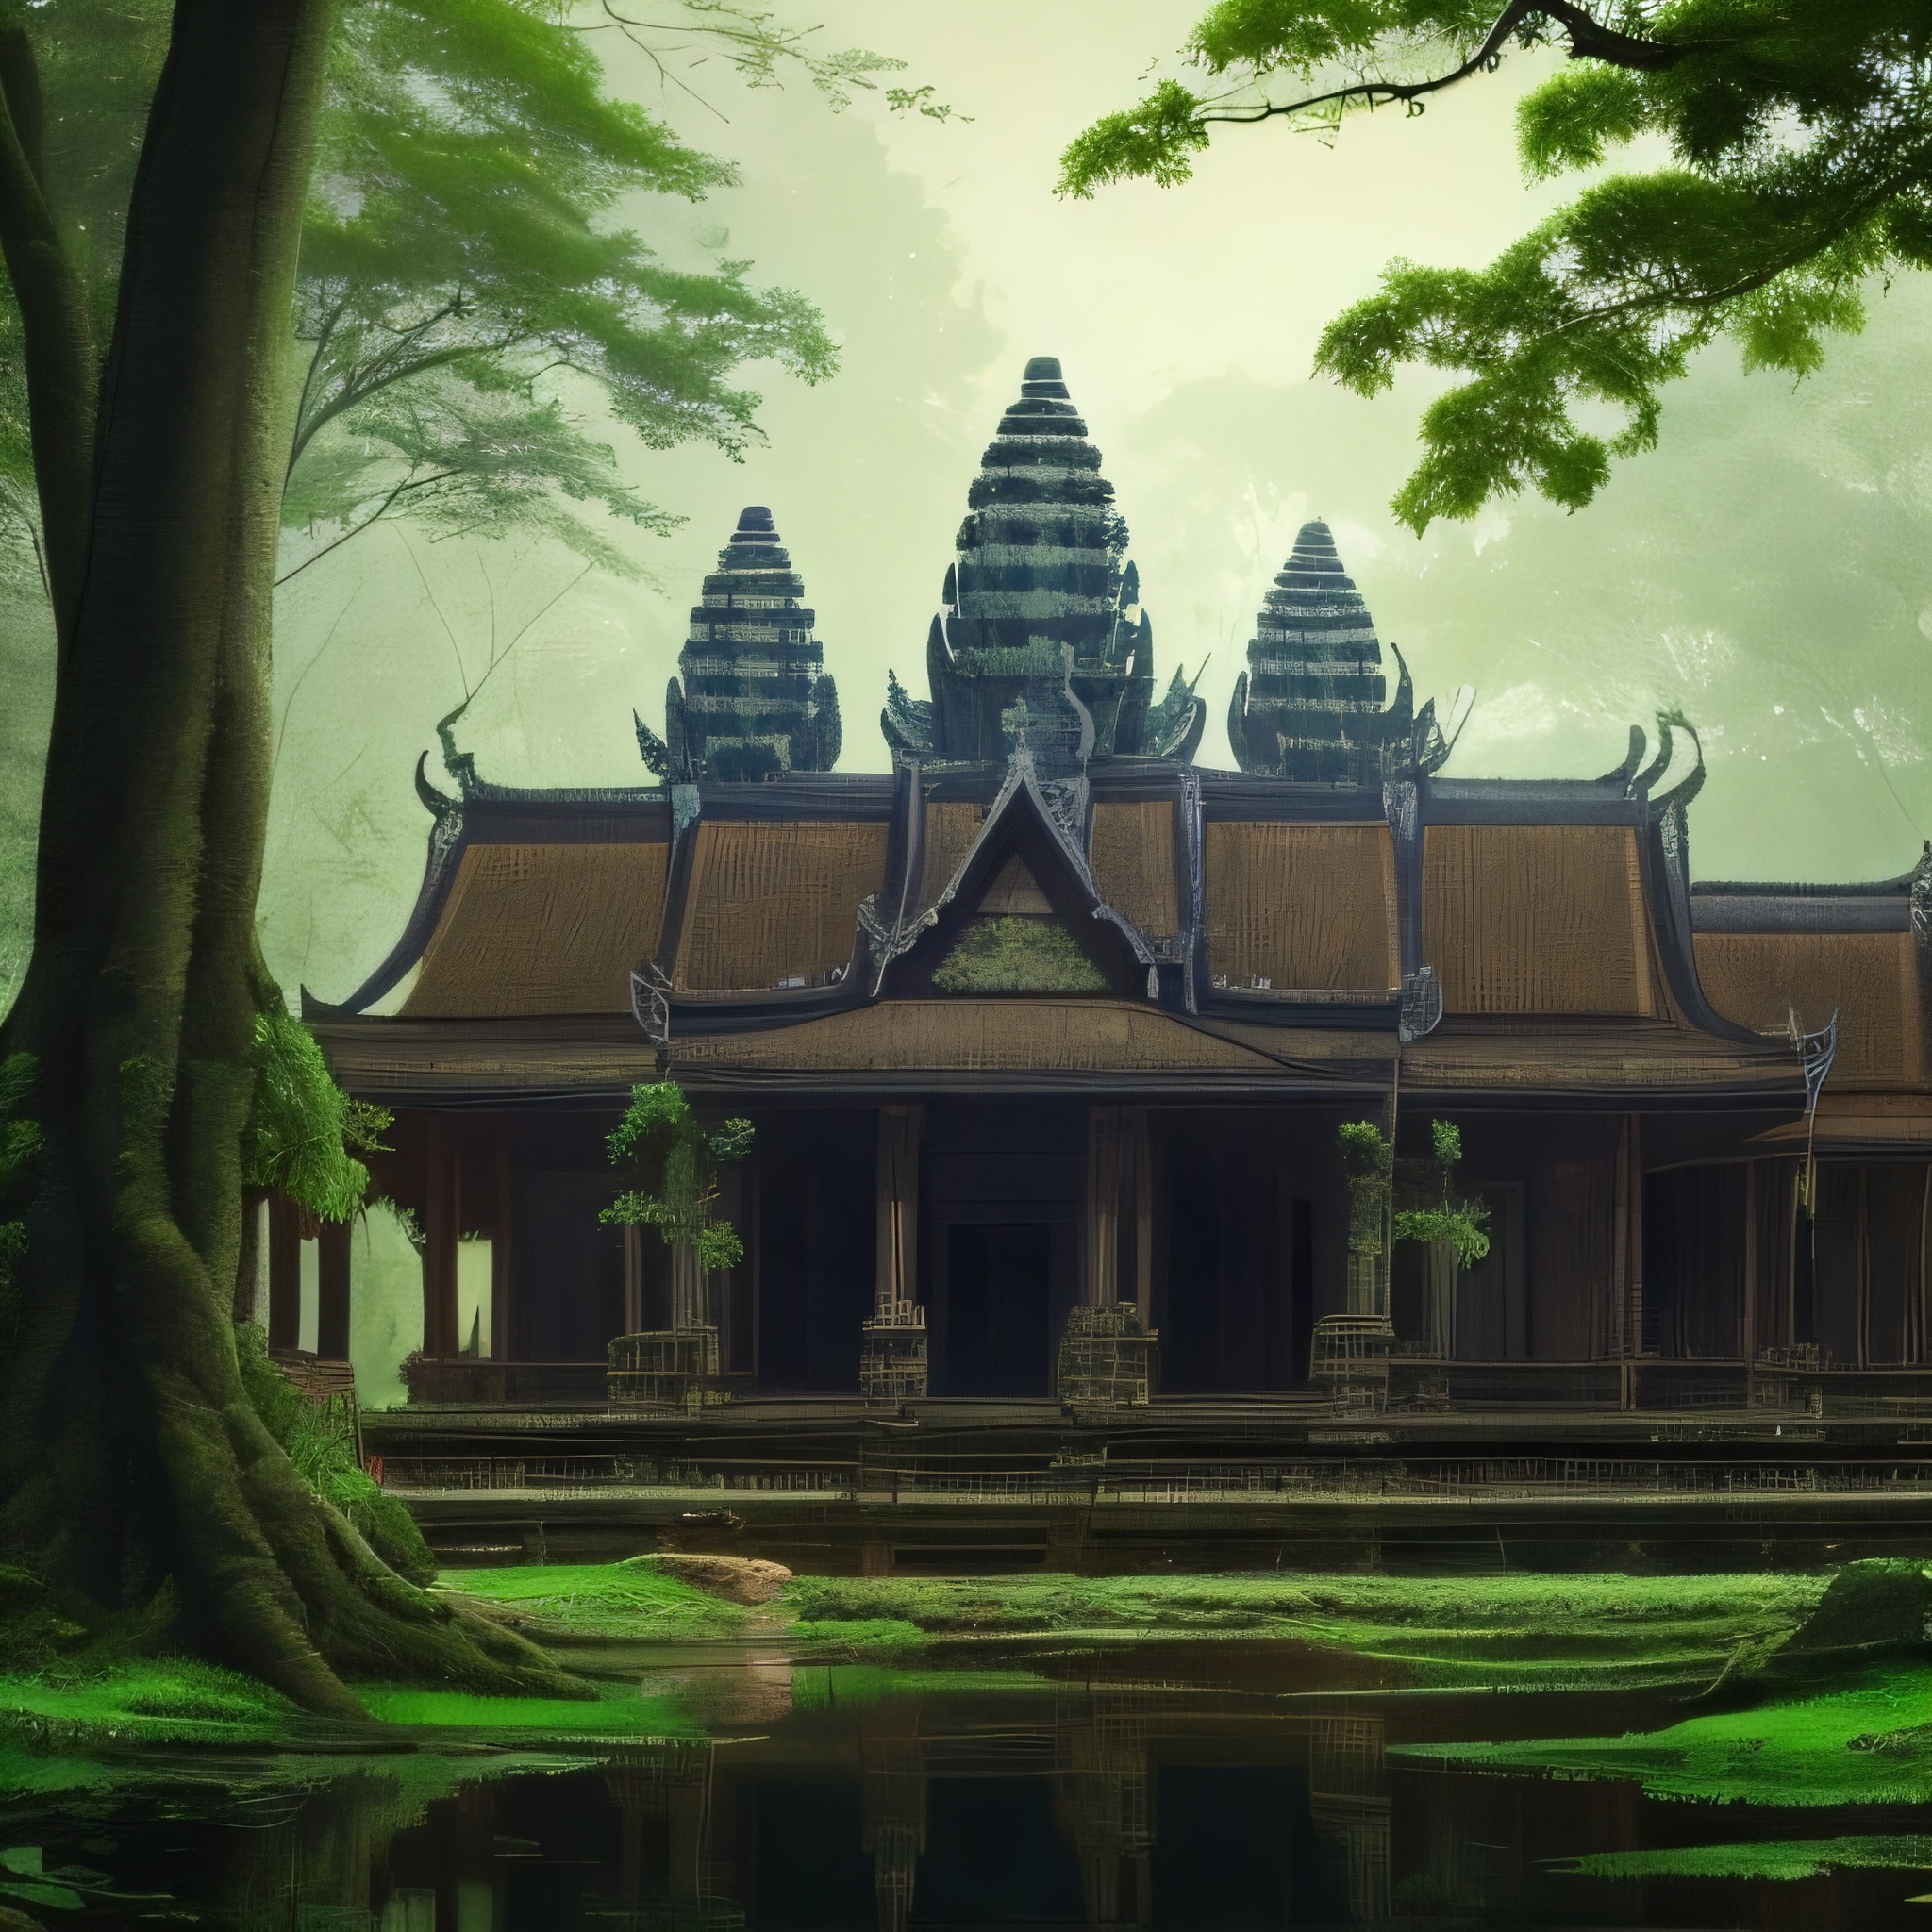 A large pagoda in the middle of a Angkor Wat Temple forest